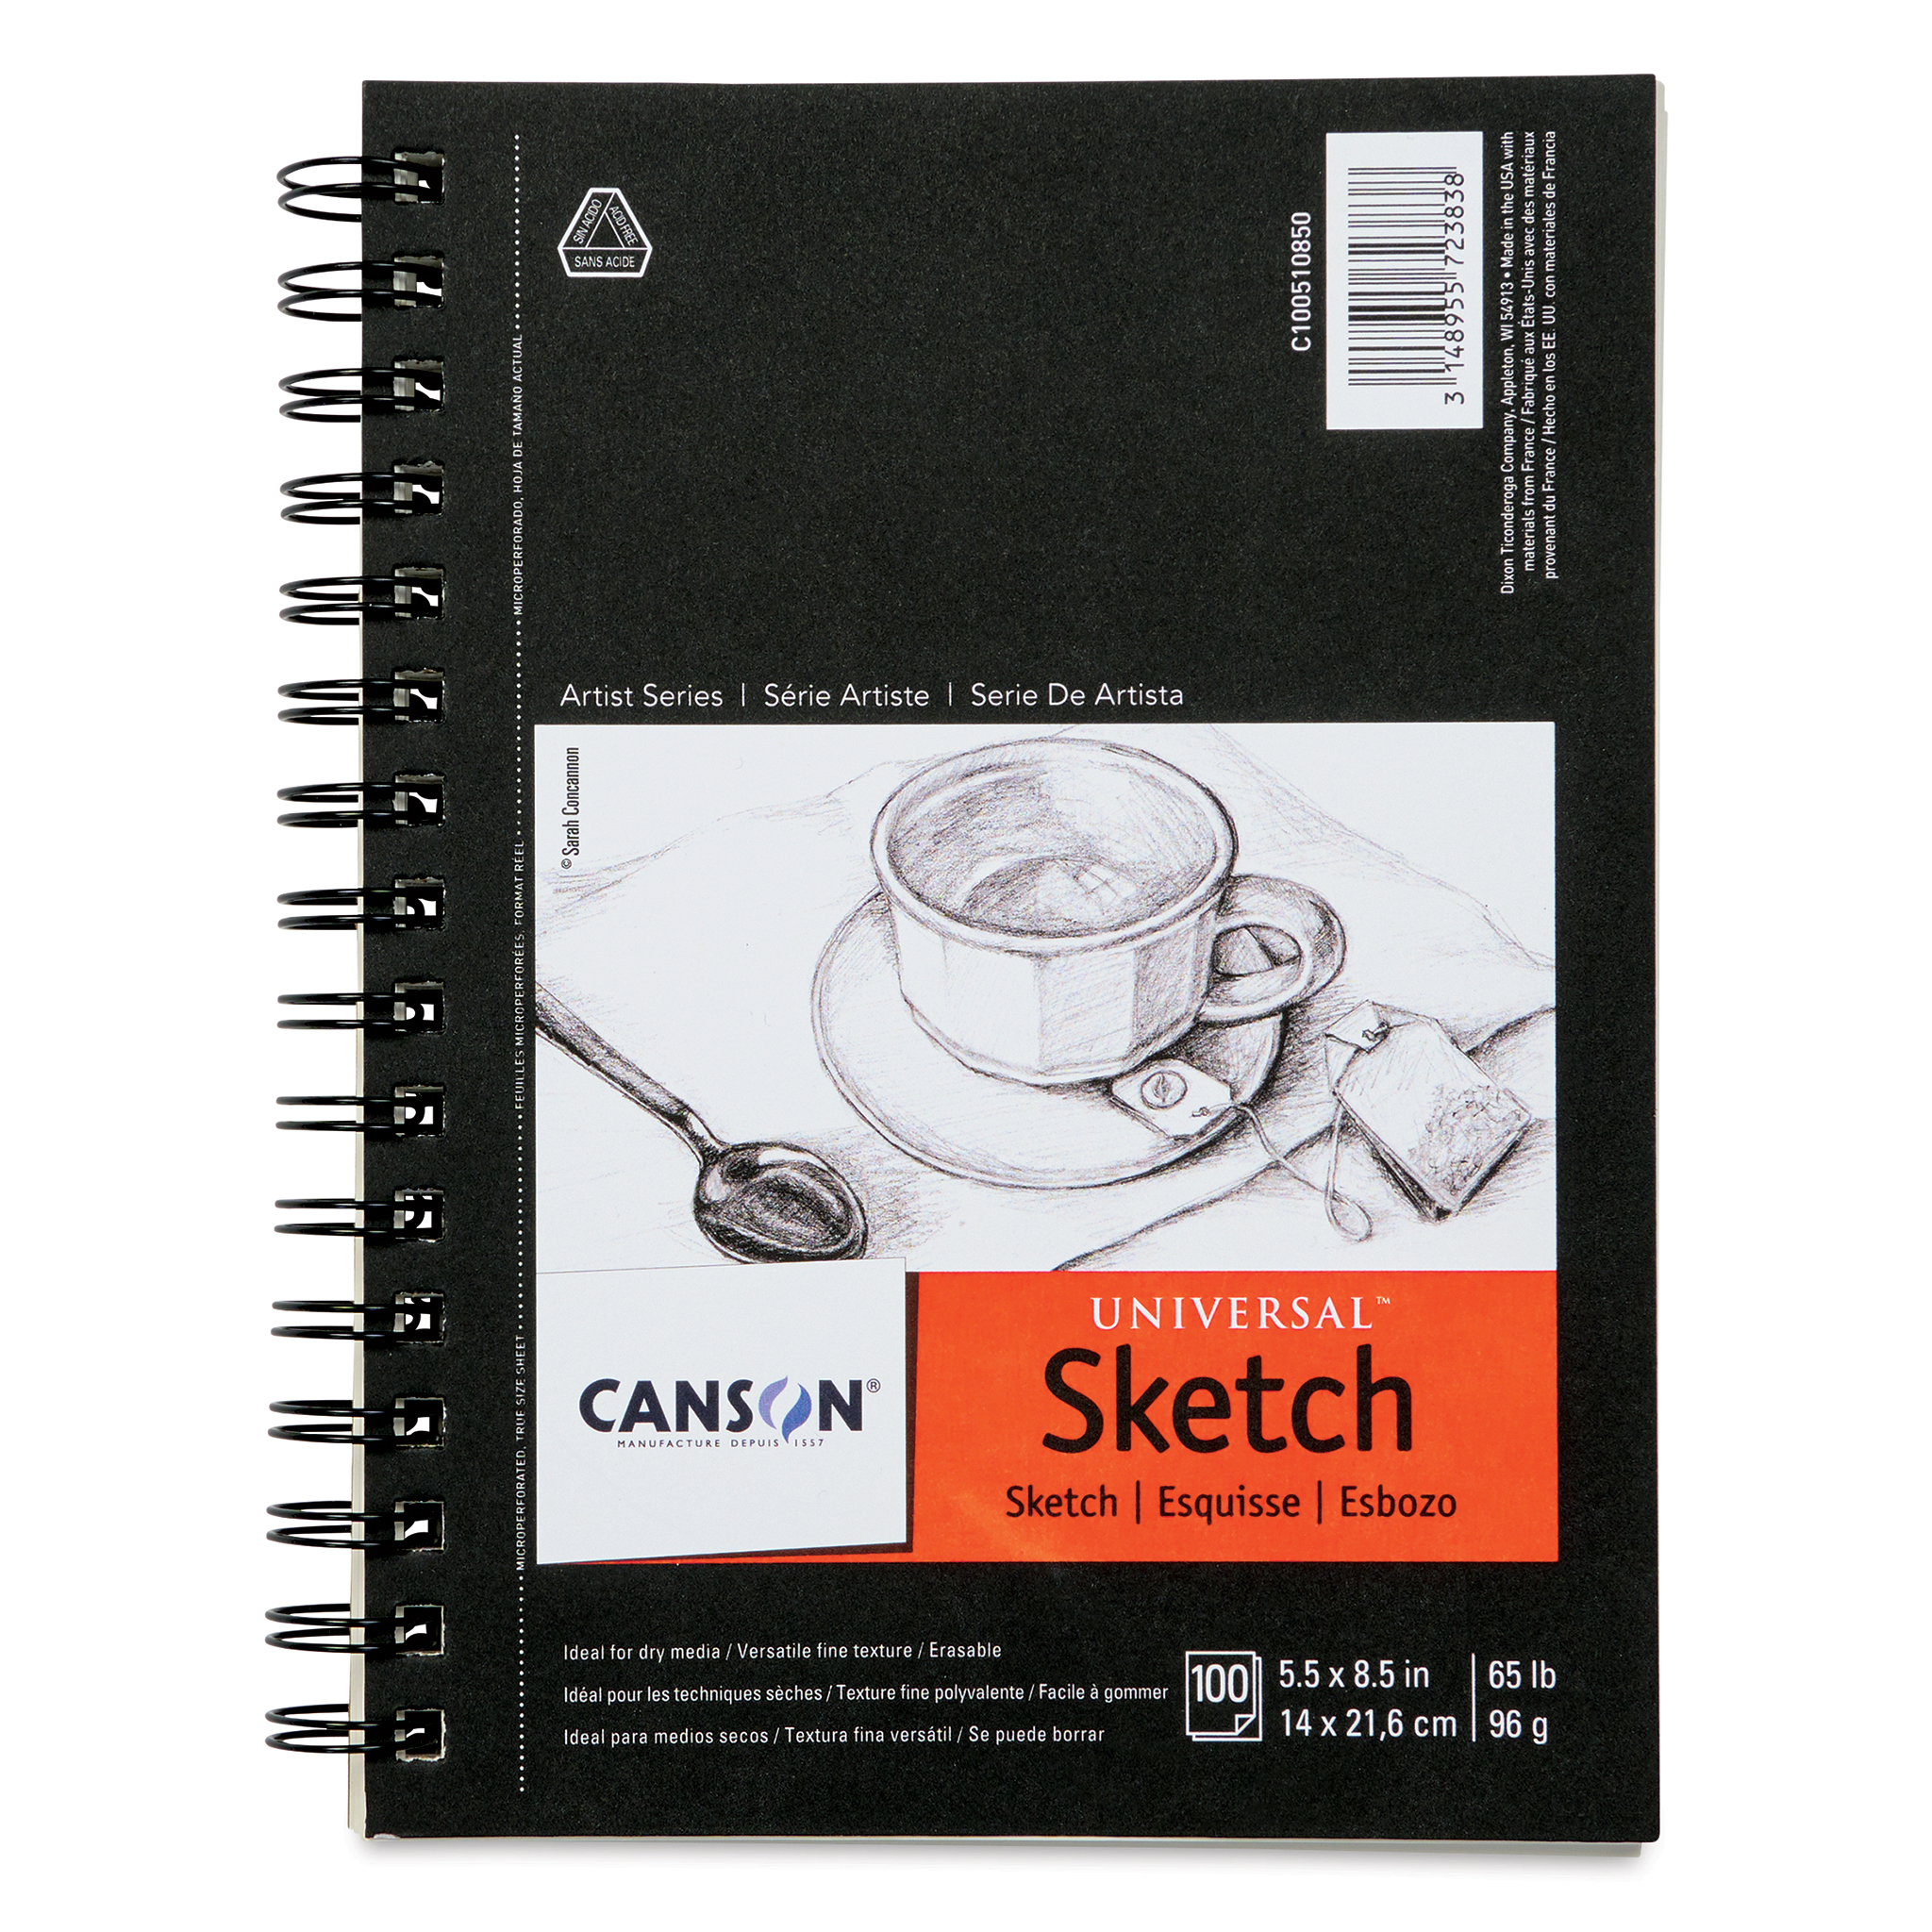 REVIEW: Canson XL Mix Media Sketch Pad 9 x 12 